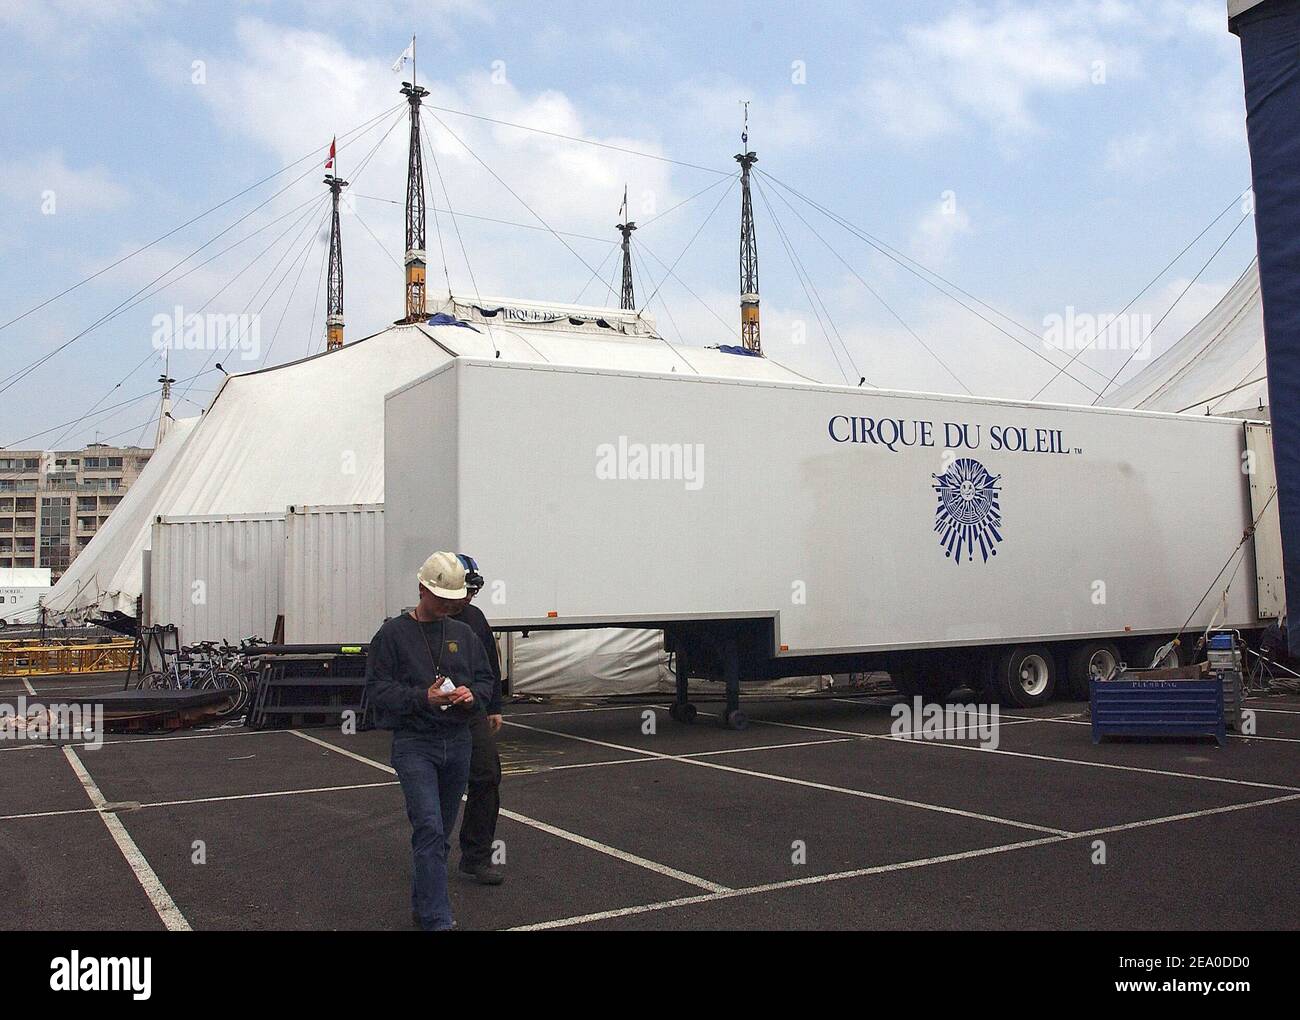 The world famous circus from Quebec 'Cirque du Soleil' installs his tent in Boulogne-Billancourt near Paris, France, March 31, 2005. Photo by Giancarlo Gorassini/ABACA Stock Photo